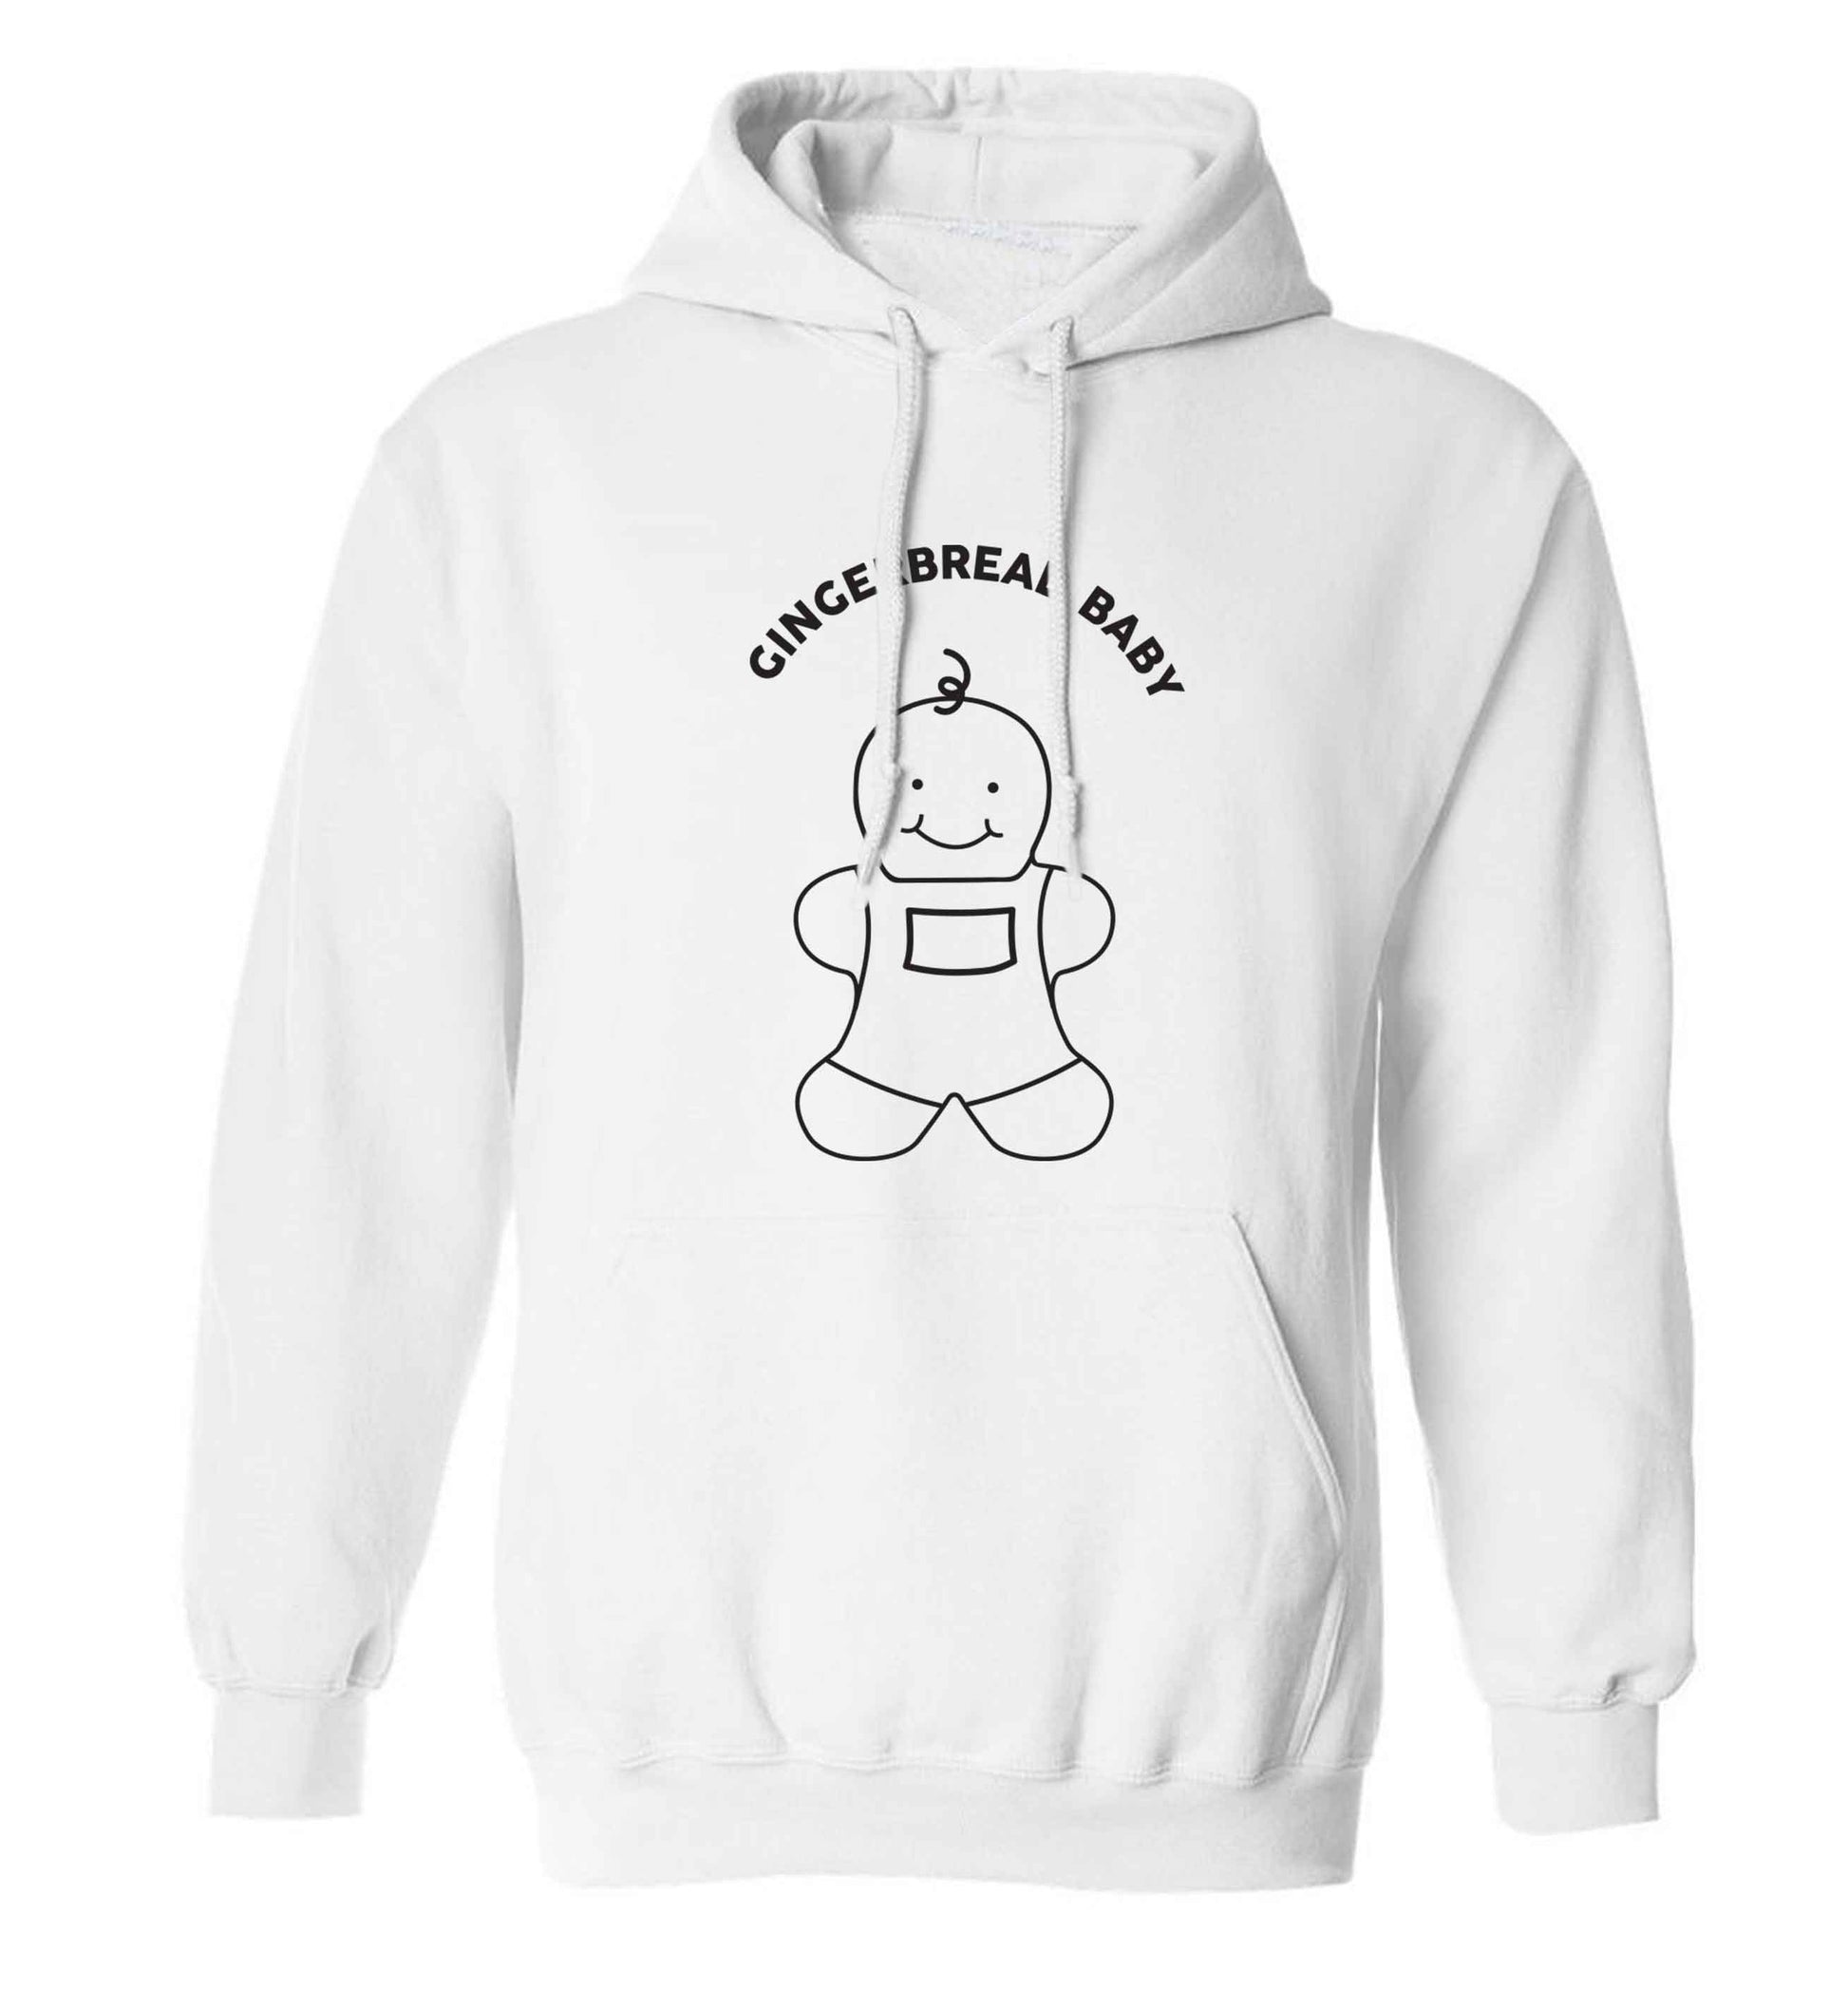 Gingerbread baby adults unisex white hoodie 2XL